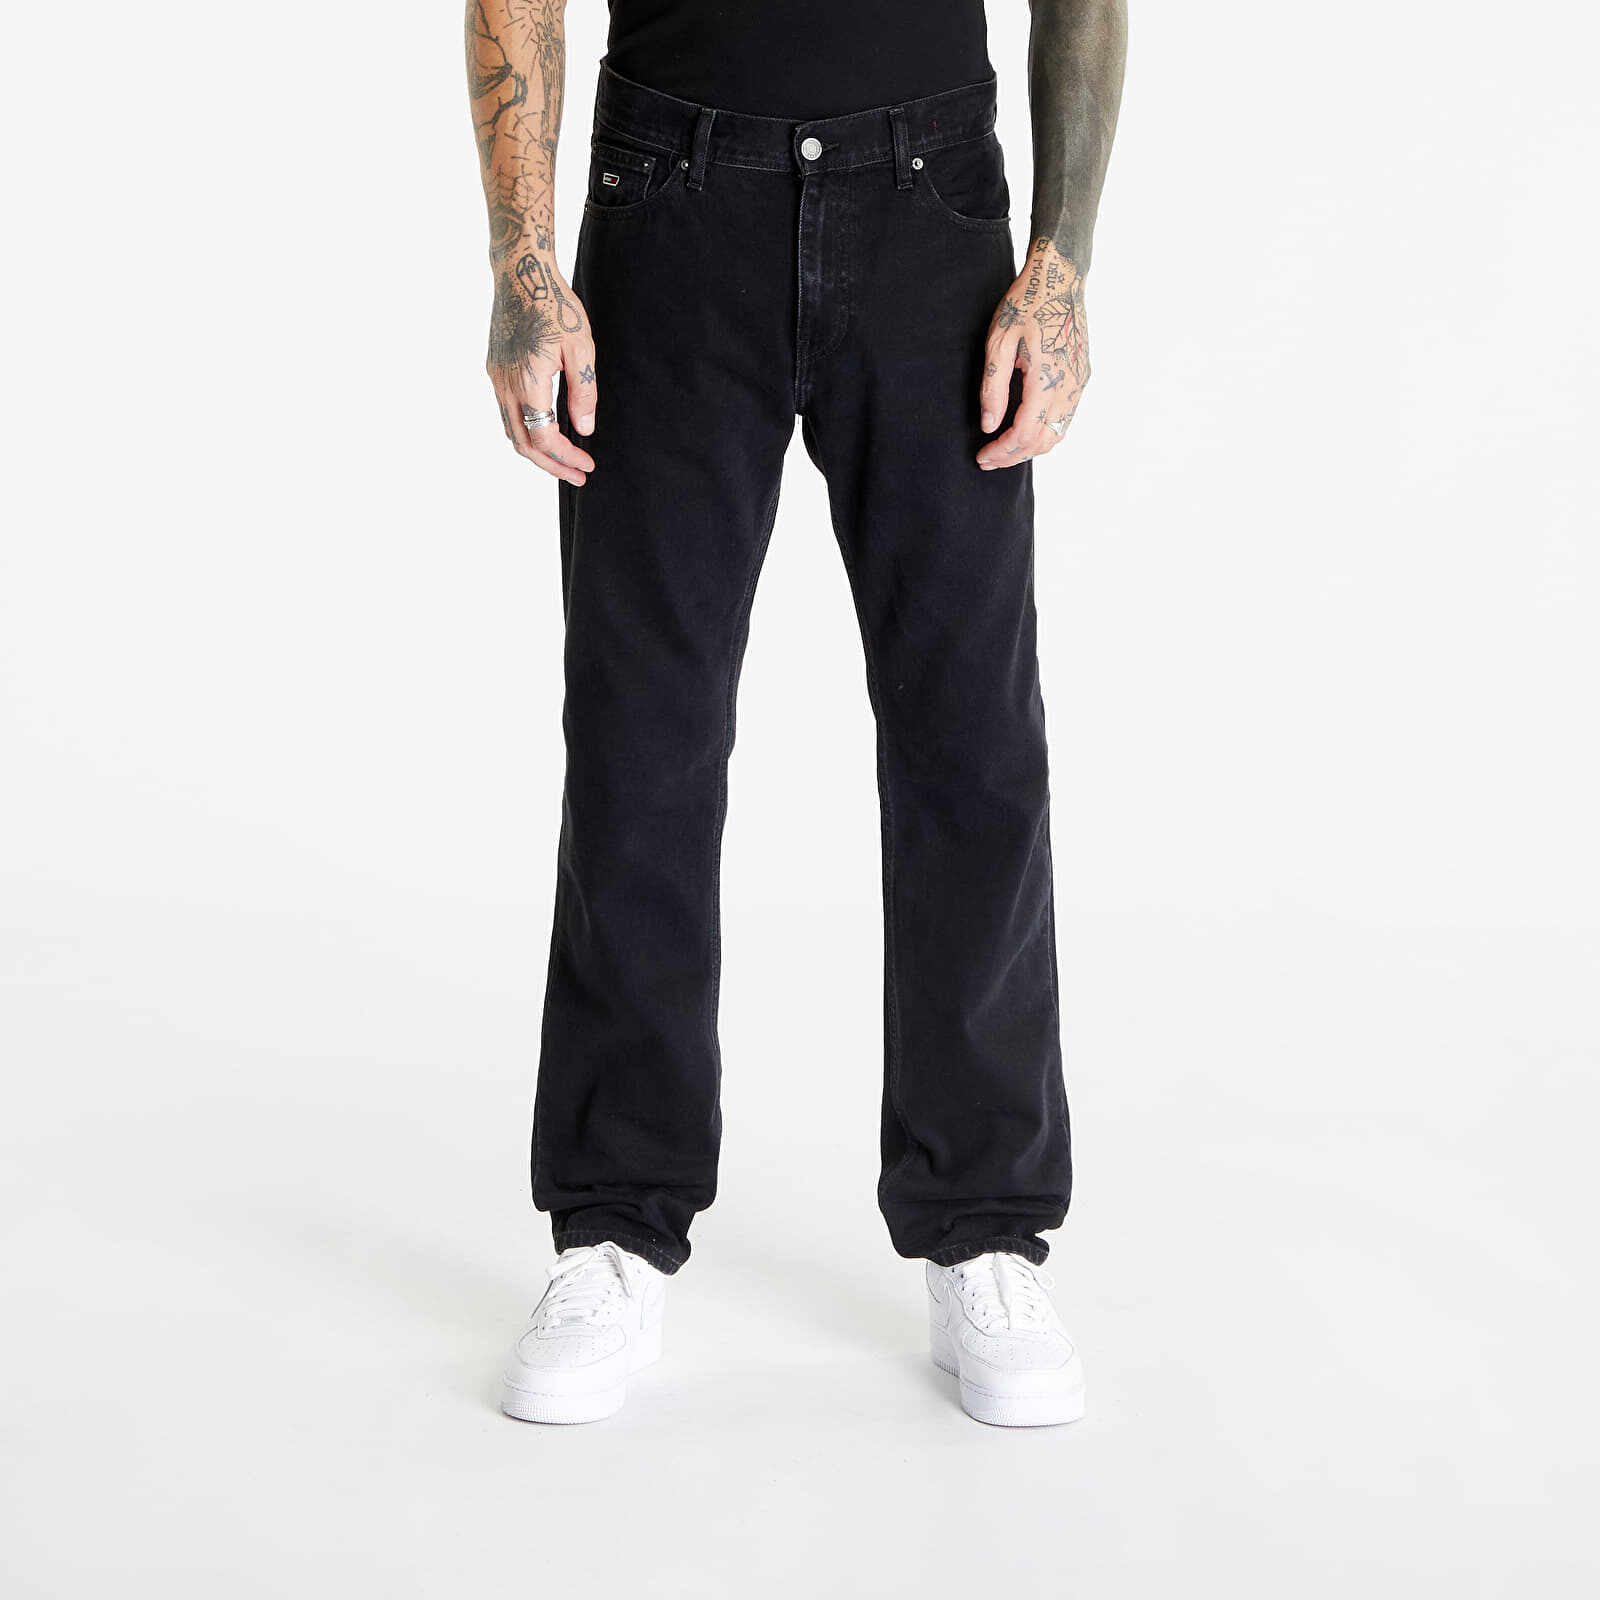 Tommy Jeans Ethan Relaxed Straight Jeans Denim Black